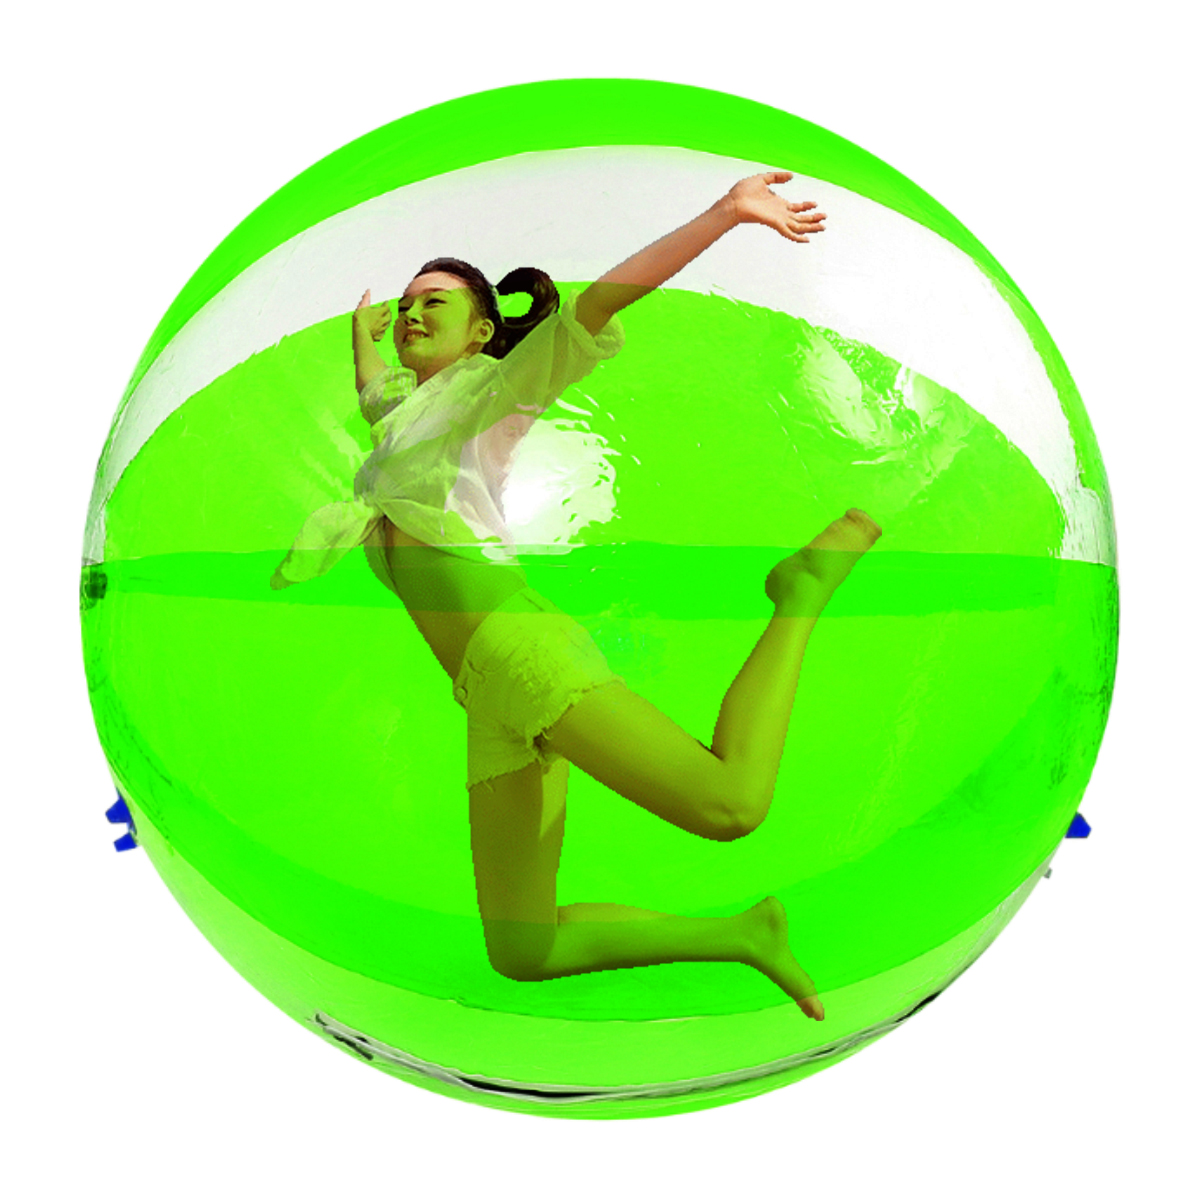 2M/6.6ft Inflatable Float PVC Ball Soft Water Walking Ball With Zipper Swimming Pool Rolling Dance Ball Water Play Toys Kids Adult Green For Outdoor Water Sports Maxload 150KG